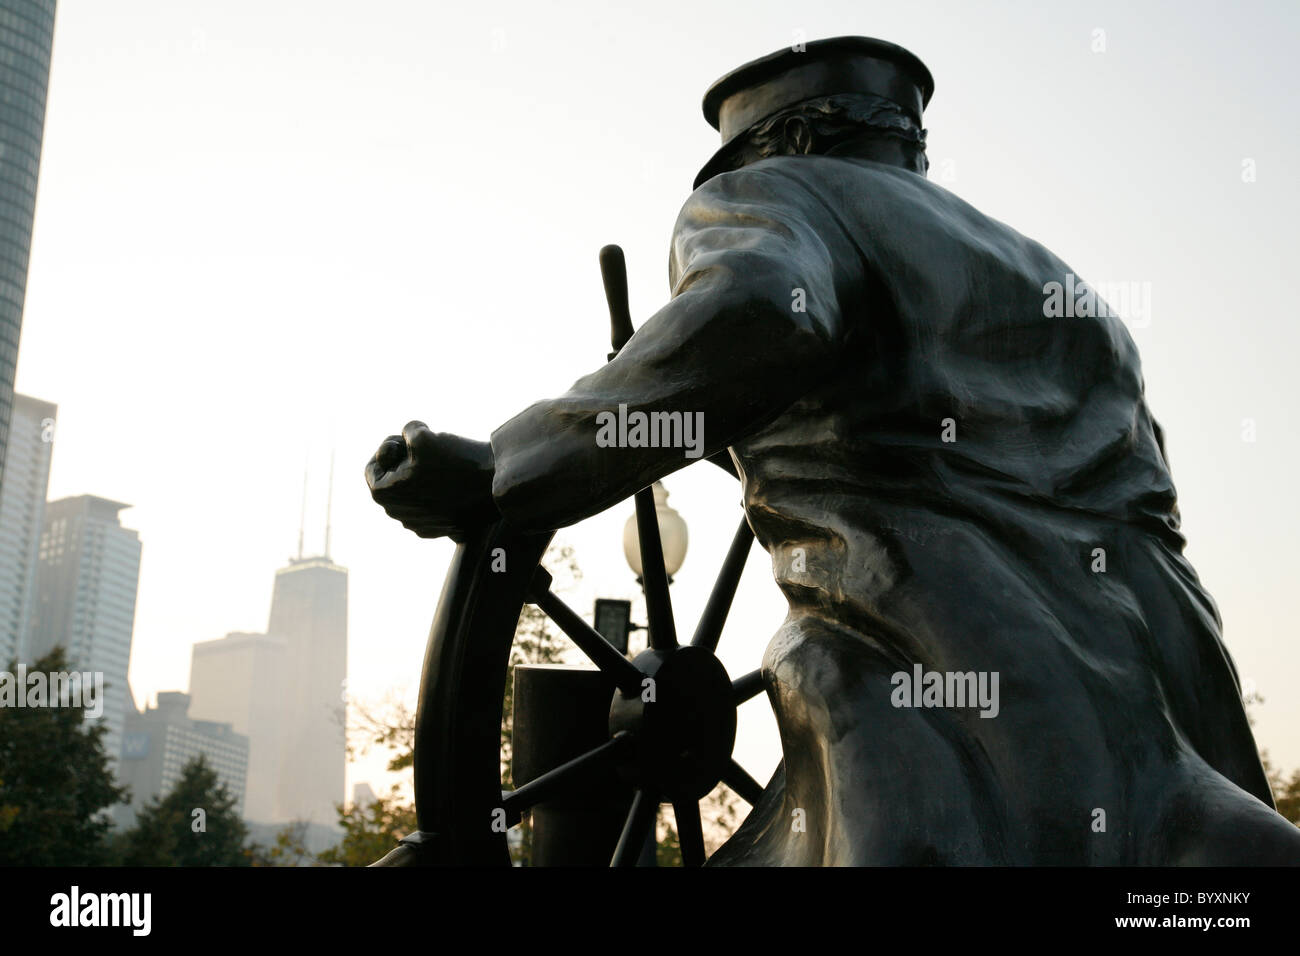 Captain on the Helm sailor statue at Navy Pier Chicago Illinois Stock Photo